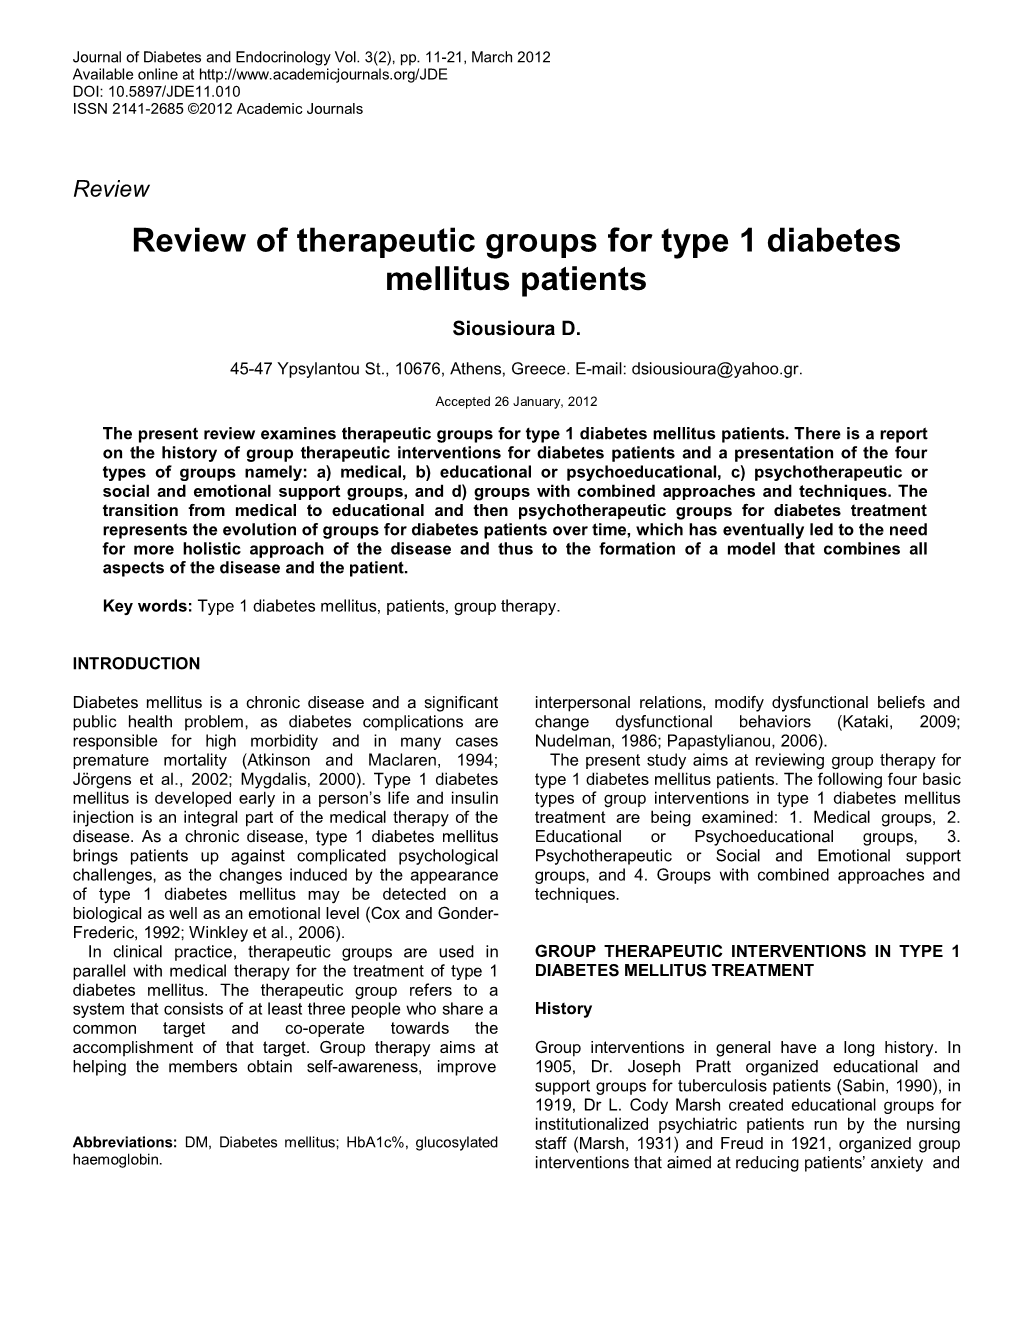 Review of Therapeutic Groups for Type 1 Diabetes Mellitus Patients